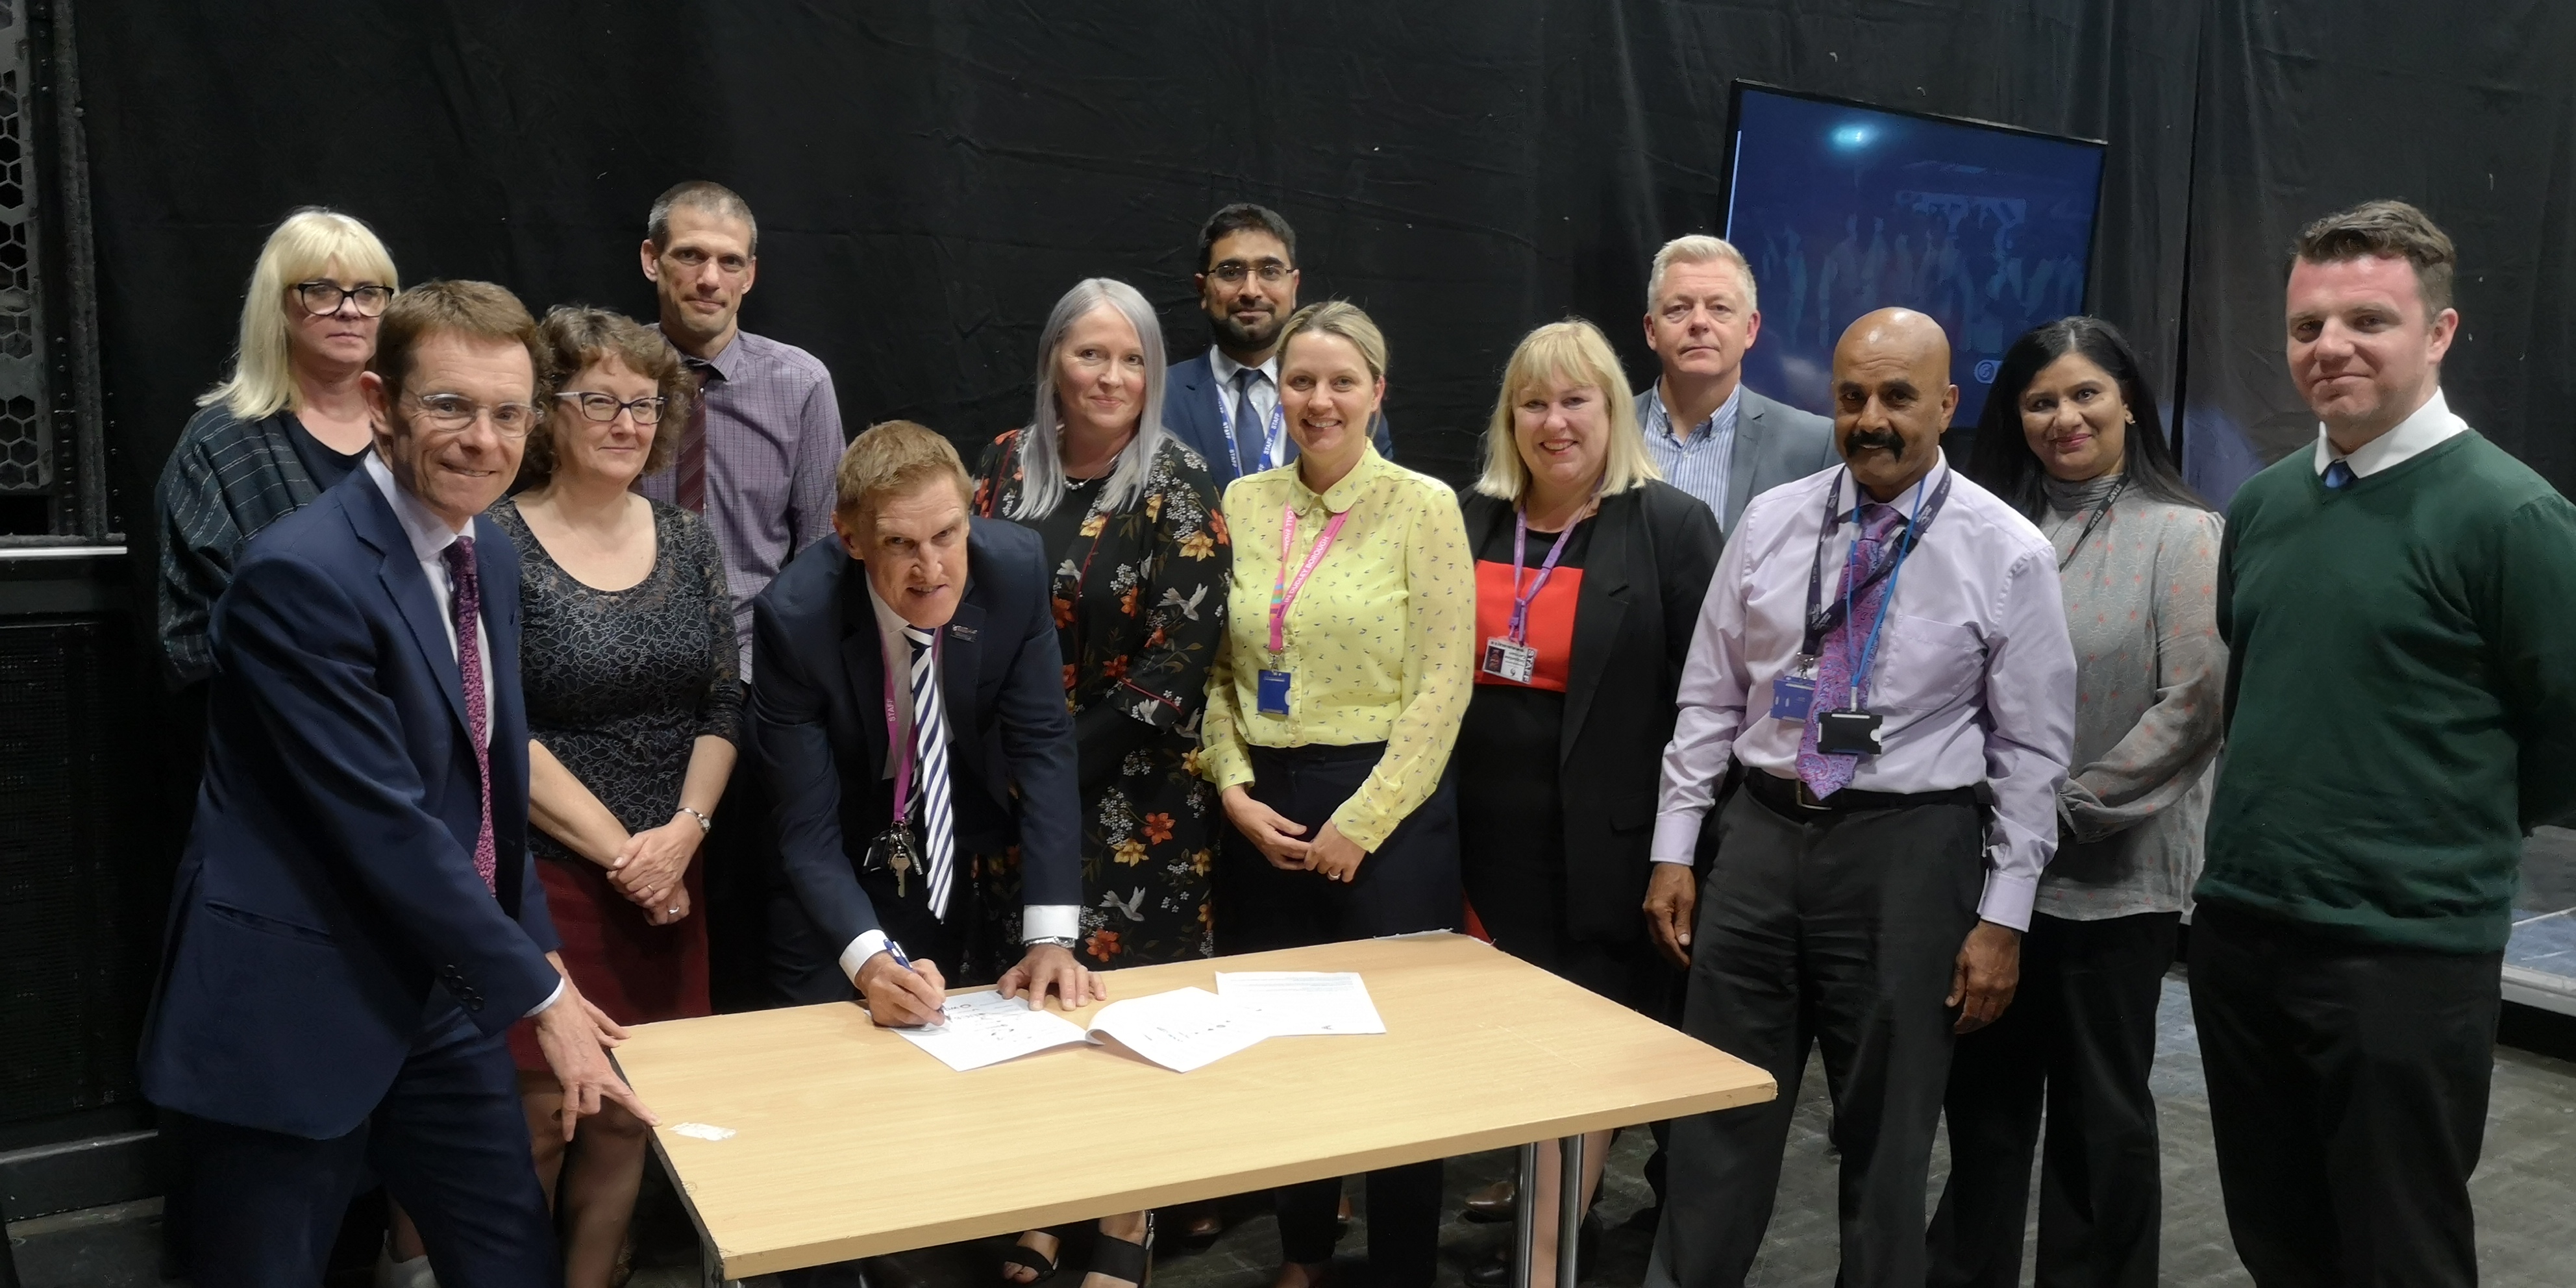 Mayor Andy Street joined college leaders as they signed the new Student Safety charter